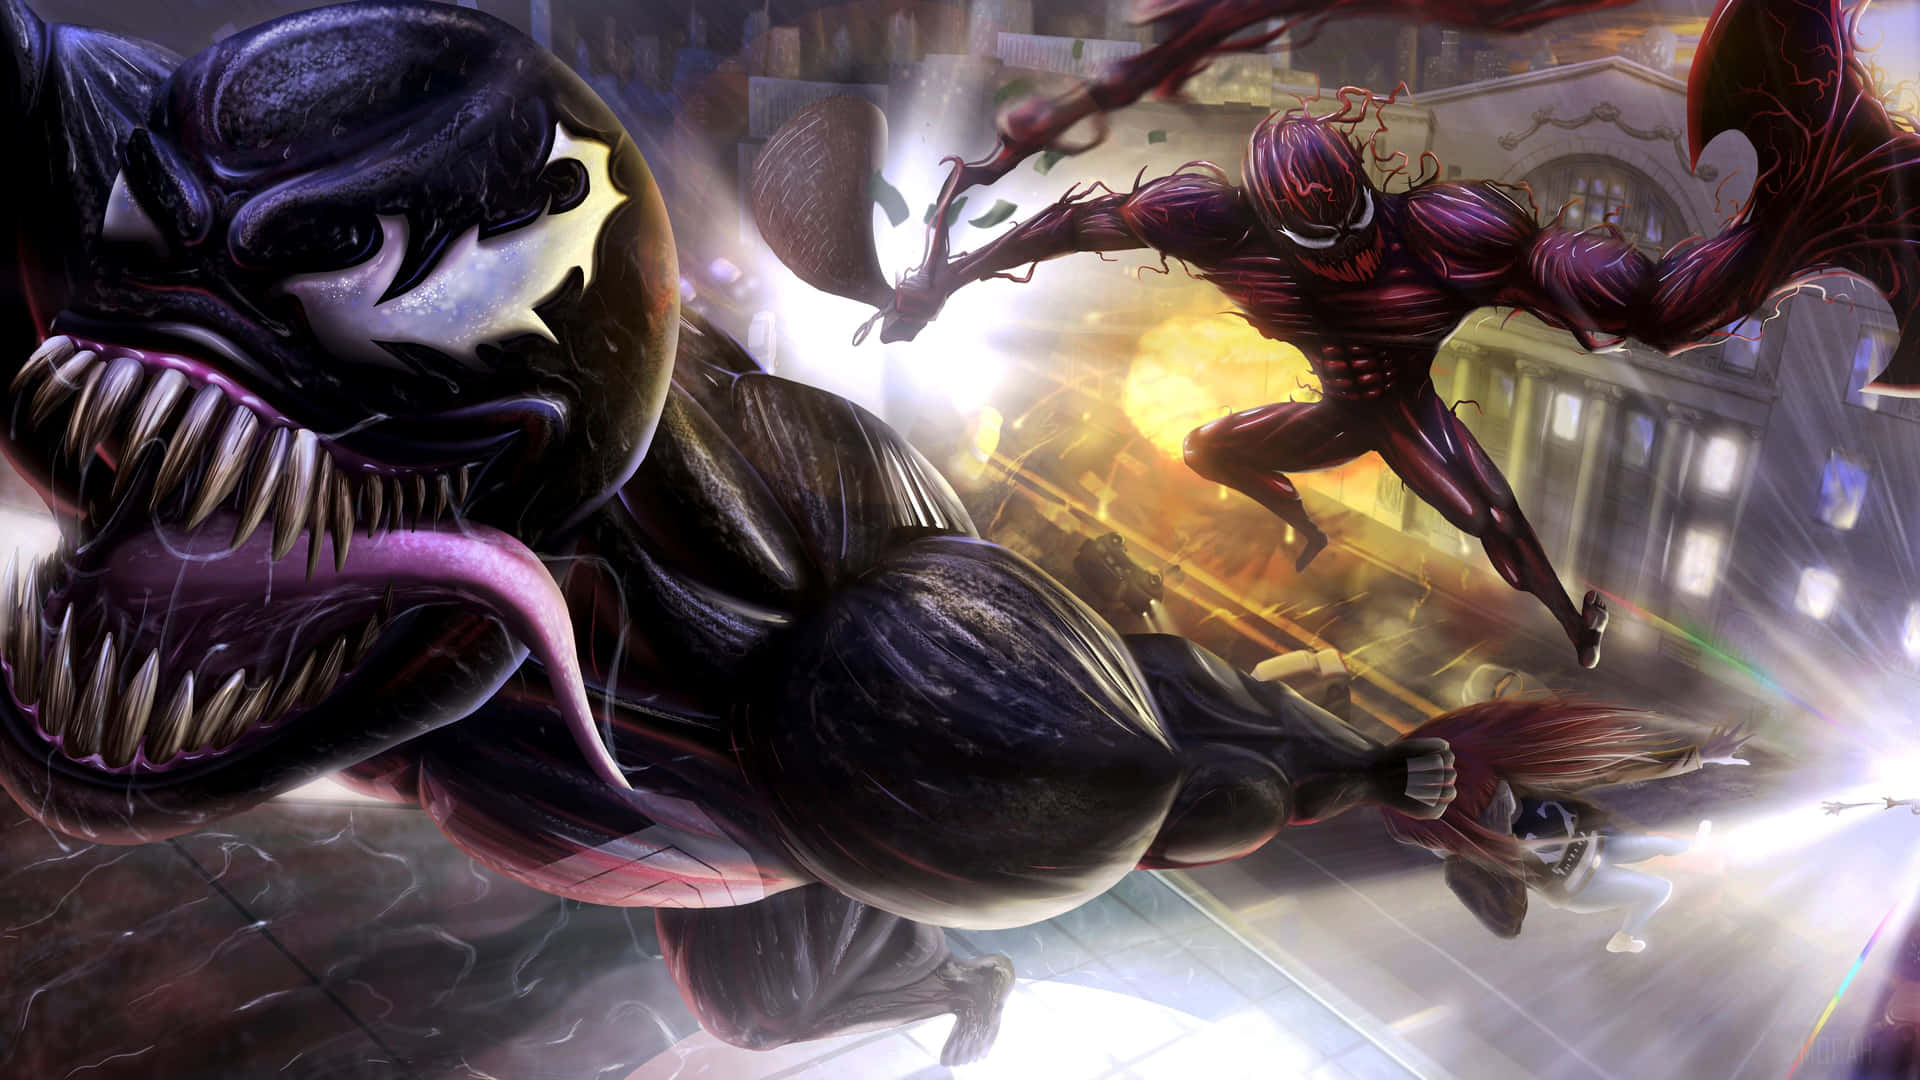 Carnage and Venom face off in an epic showdown Wallpaper